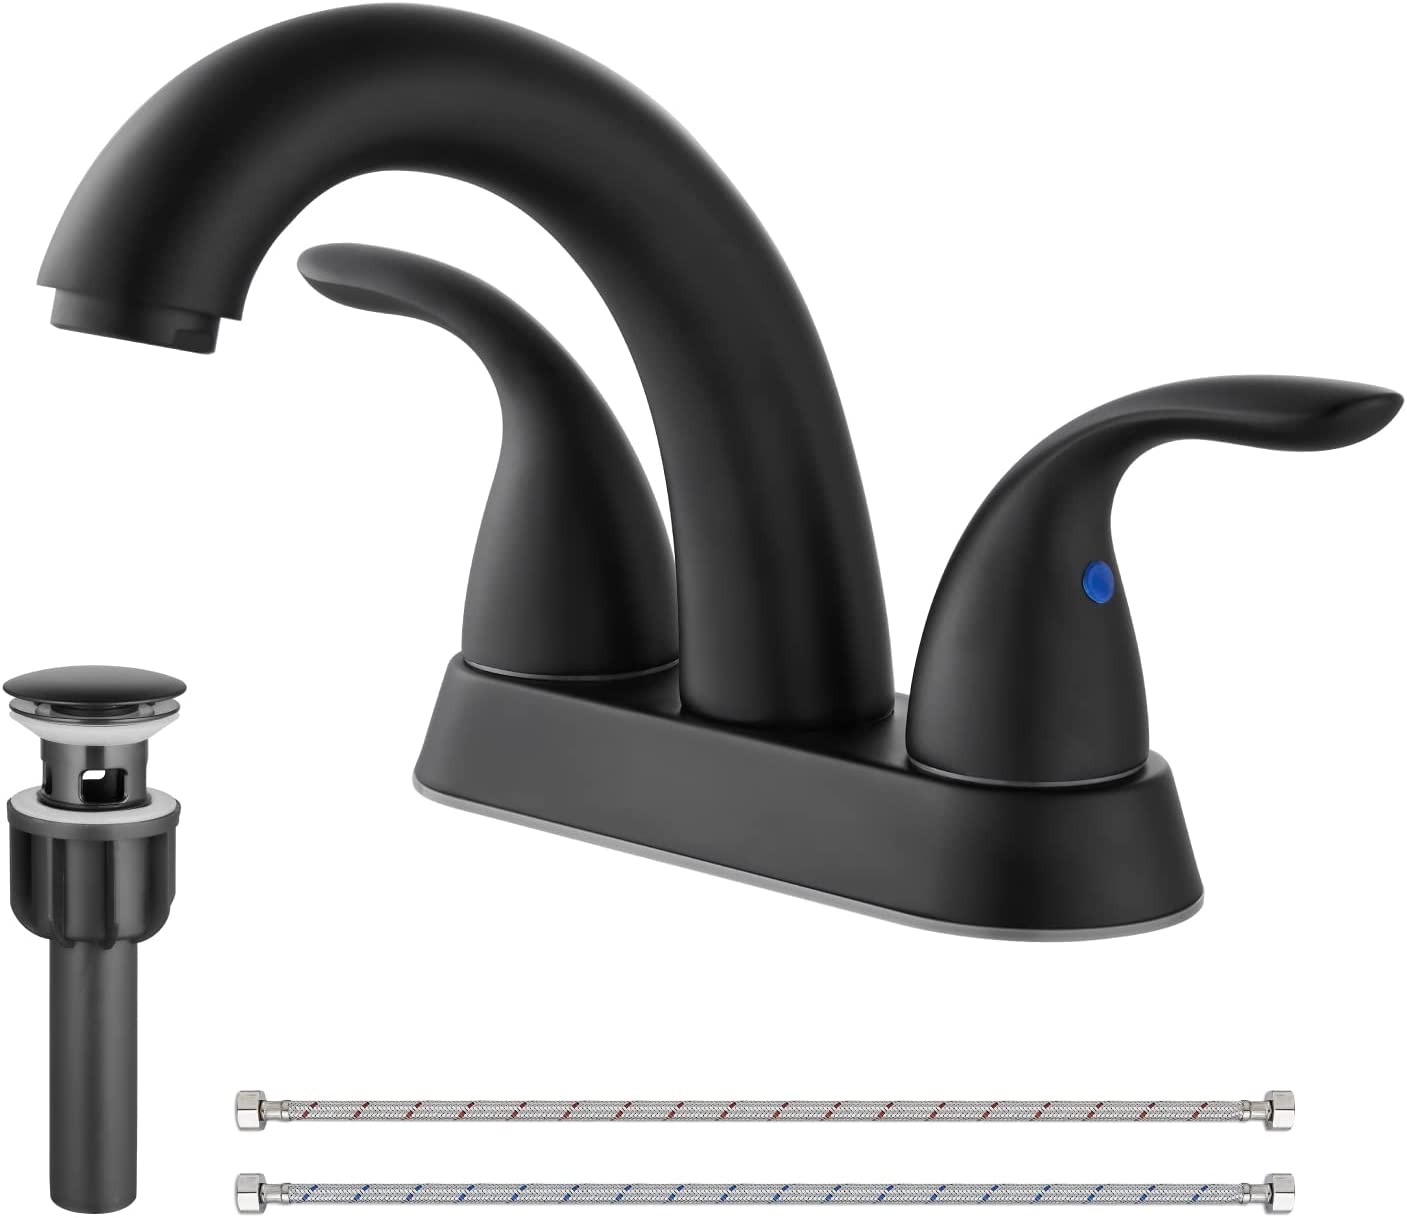 
                  
                    Cinwiny 4 Inch Centerset Bathroom Lavatory Faucet  Deck Mount 2 Handles Bathroom Sink Faucet Mixer Tap with Deck Plate Pop up Drain and Water Supply Hoses
                  
                